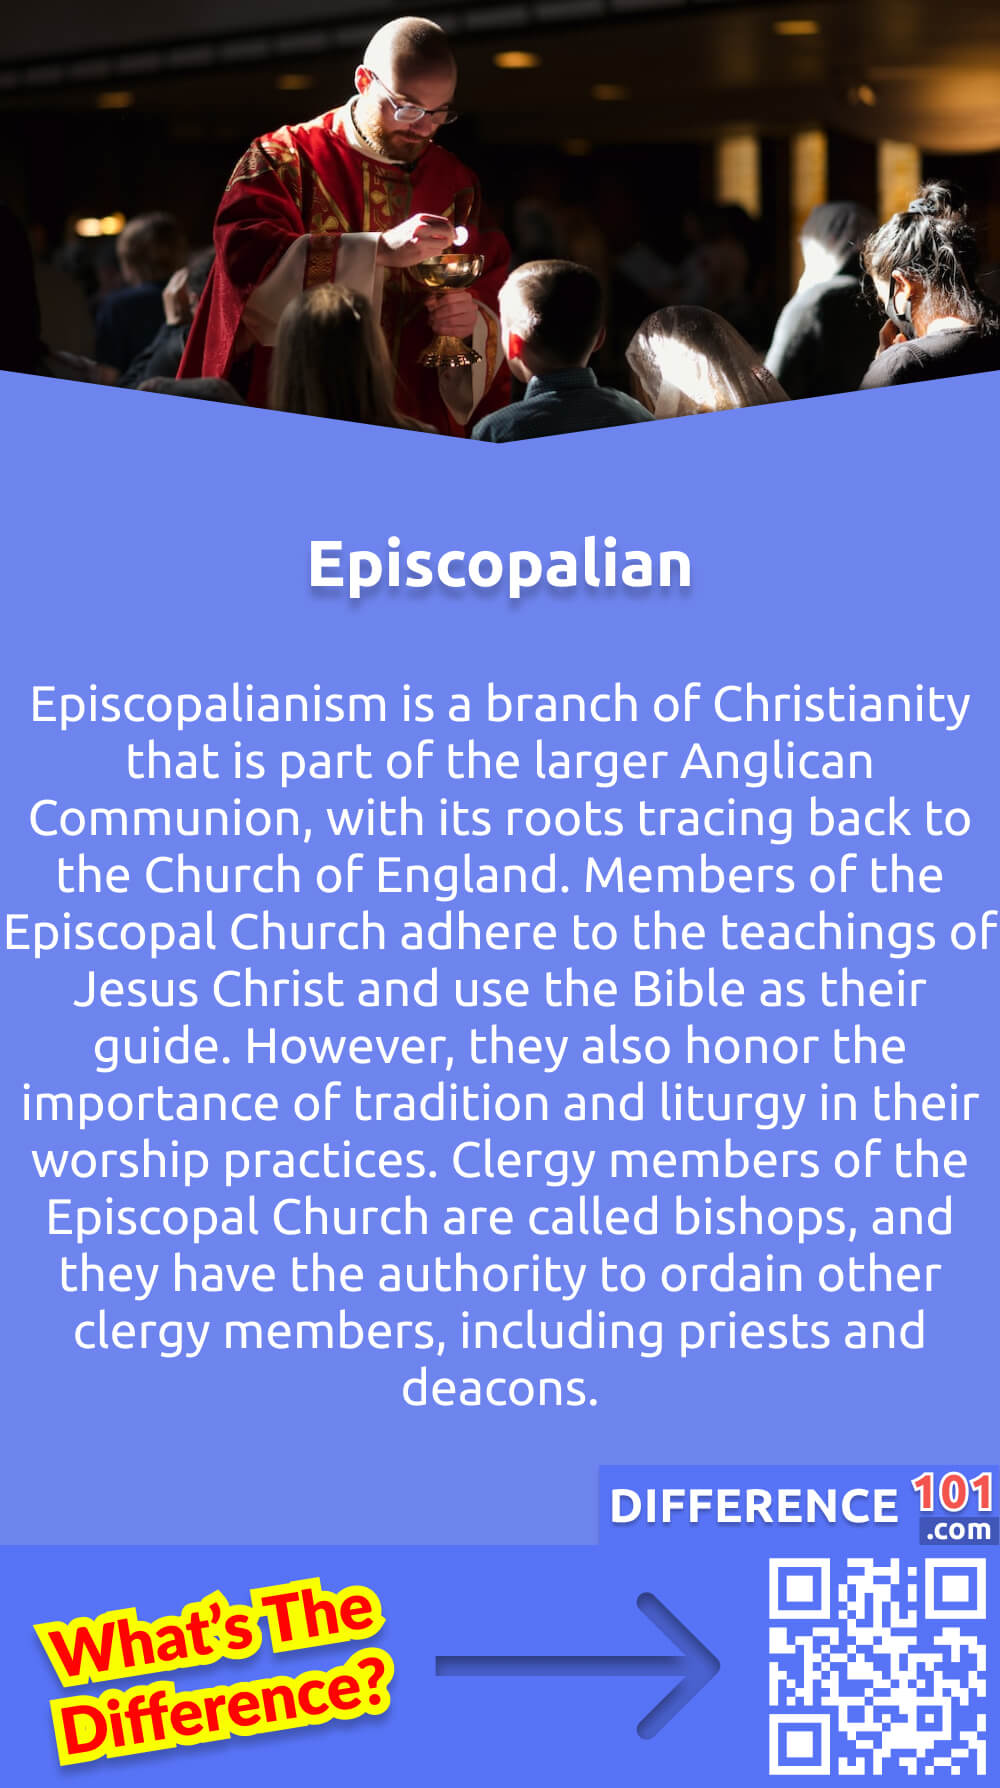 What Is Episcopalian? Episcopalianism is a branch of Christianity that is part of the larger Anglican Communion, with its roots tracing back to the Church of England. Members of the Episcopal Church adhere to the teachings of Jesus Christ and use the Bible as their guide. However, they also honor the importance of tradition and liturgy in their worship practices. Clergy members of the Episcopal Church are called bishops, and they have the authority to ordain other clergy members, including priests and deacons. The Episcopal Church strives to create inclusive and welcoming communities, emphasizing social justice and service to others. The church is committed to fostering a strong sense of community and encouraging members to grow in their personal relationships with God.